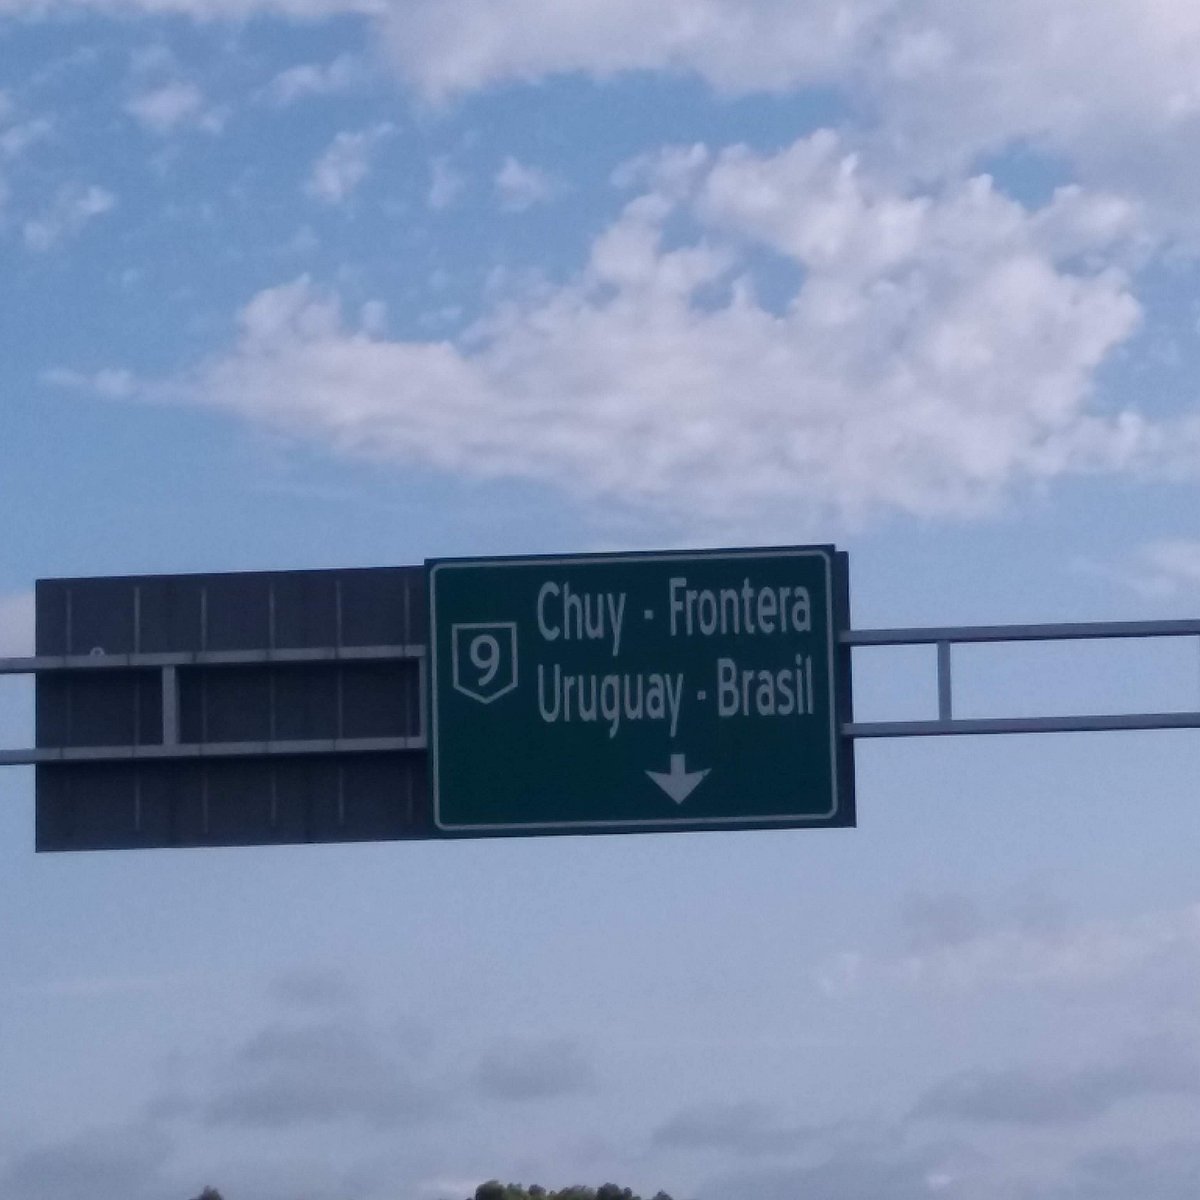 The main avenue in Chuy, Uruguay, and Chuí, Brazil is the